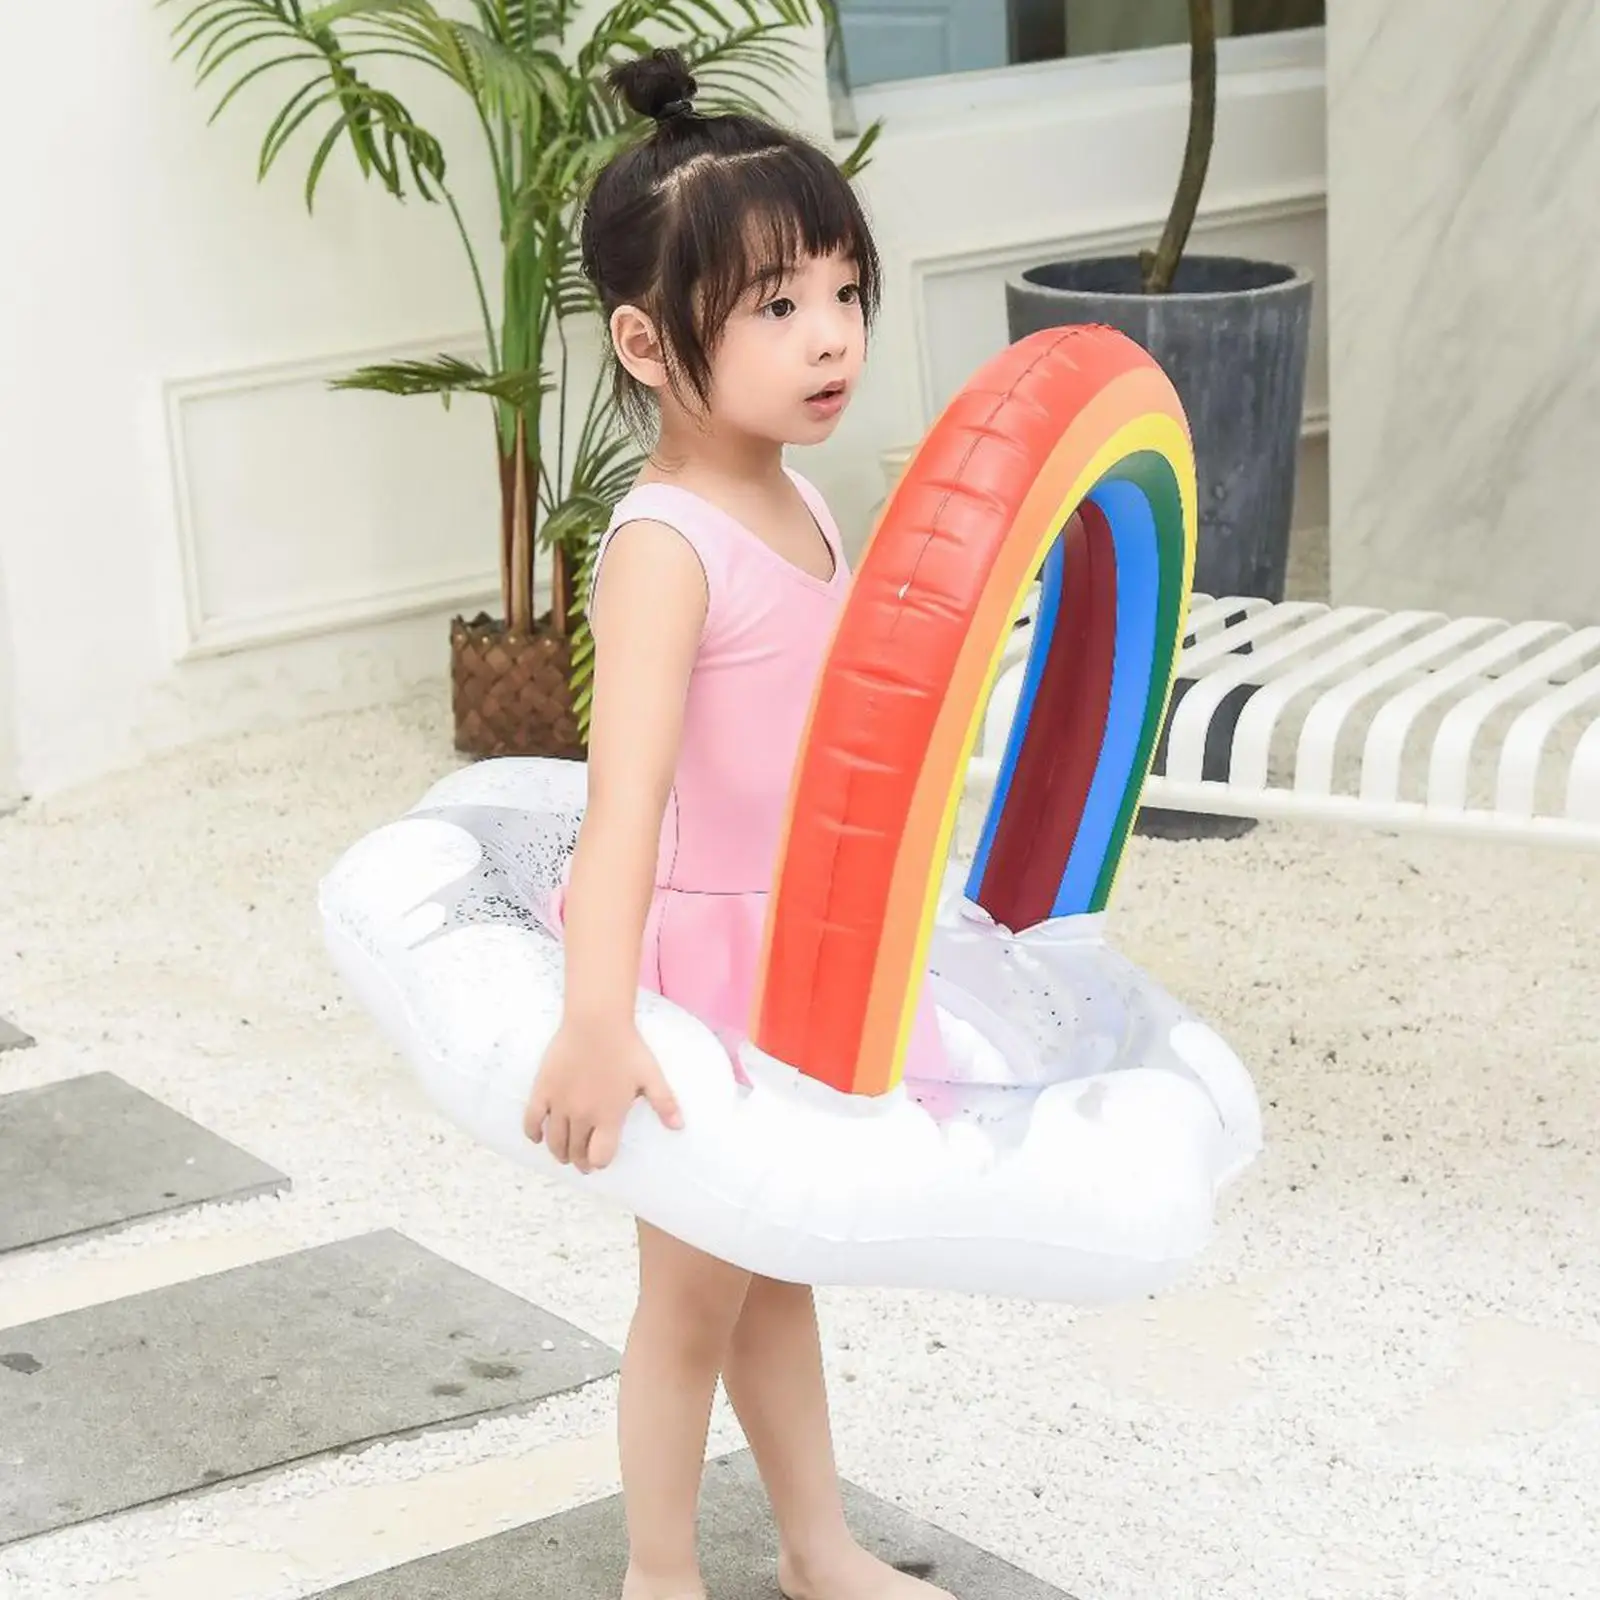 Rainbow Cloud Baby Swimming Ring with Seat Safety Training Swim Aid Toy Swim Rings for Kids Infant Newborn Toddlers Baby